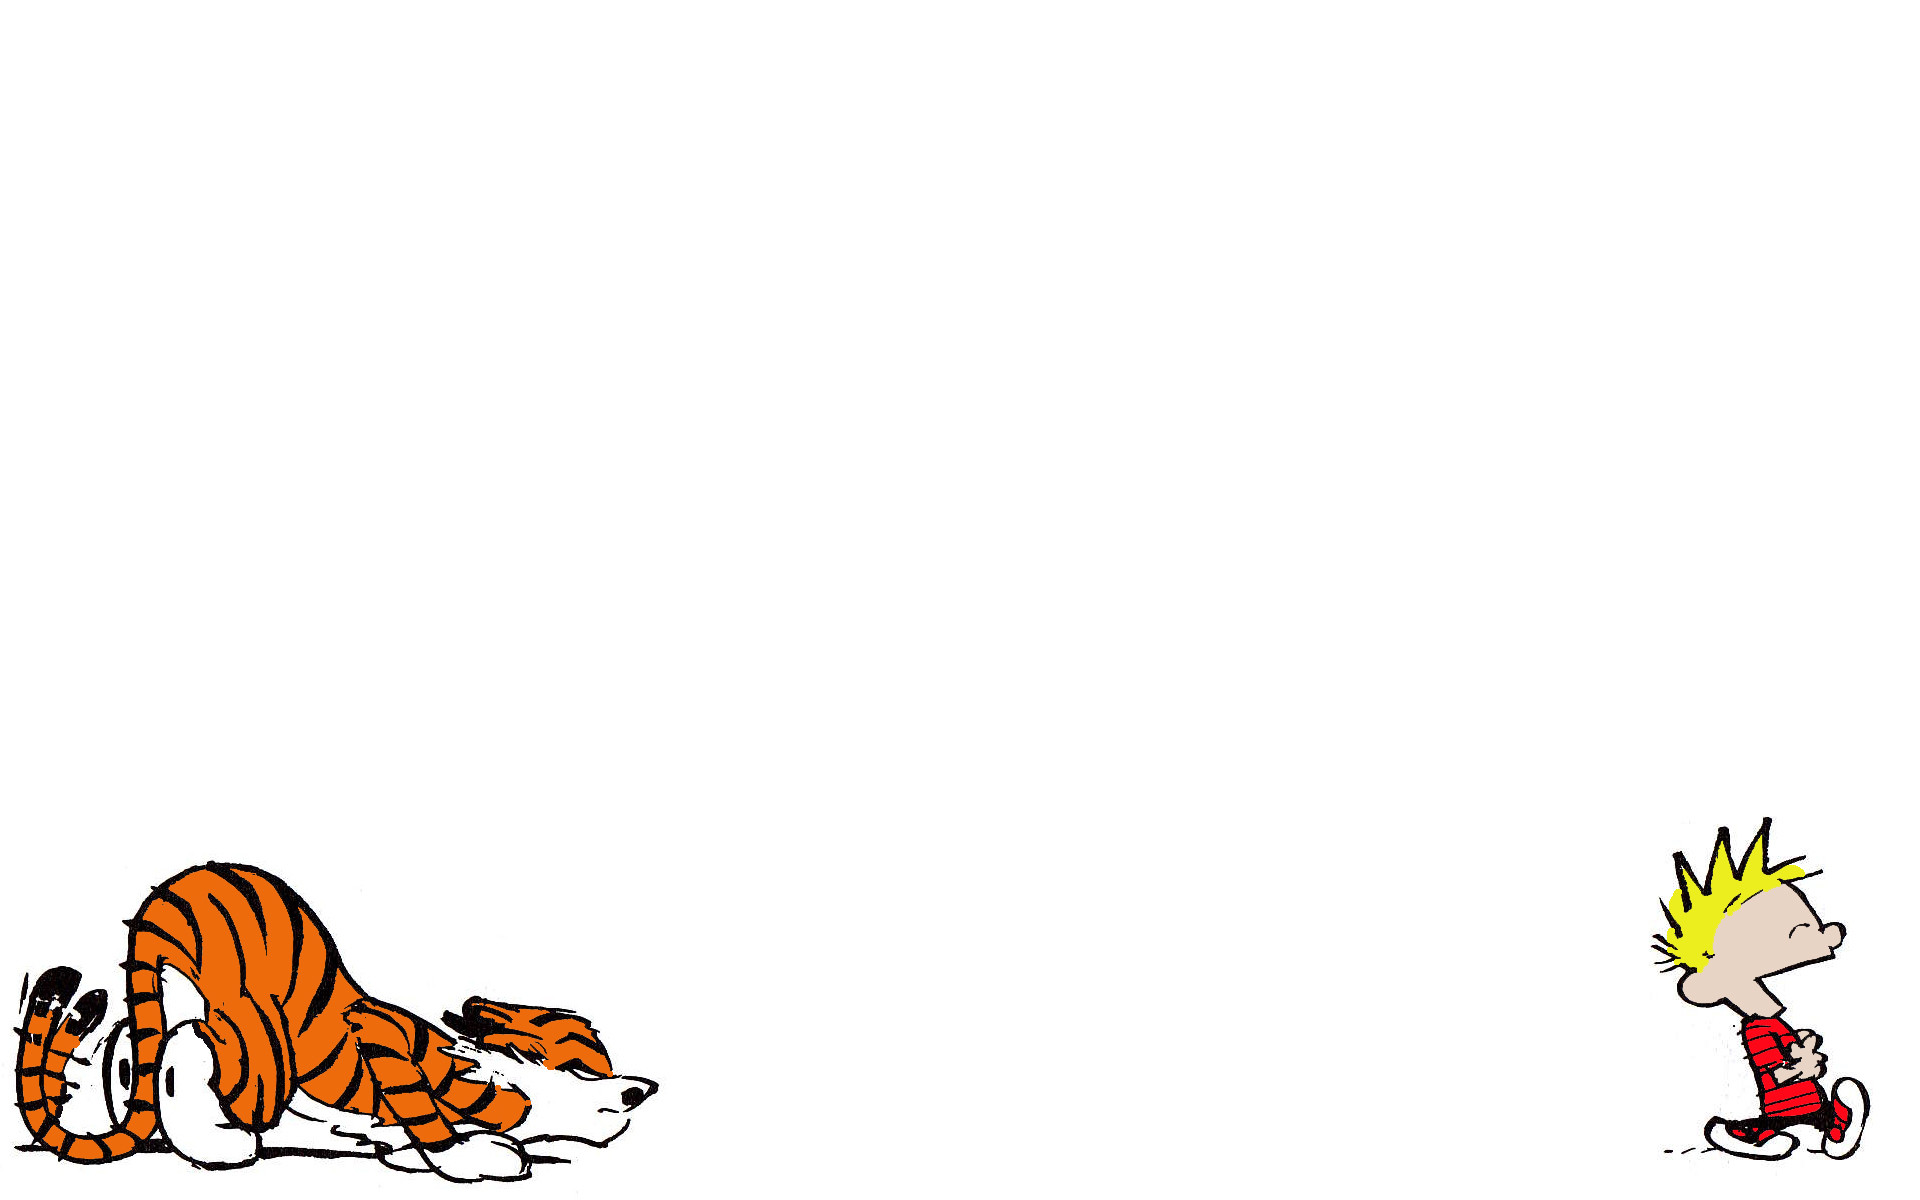 1920x1200 full hd calvin and hobbes comics full hd download high definiton wallpapers  windows 10 backgrounds colourful